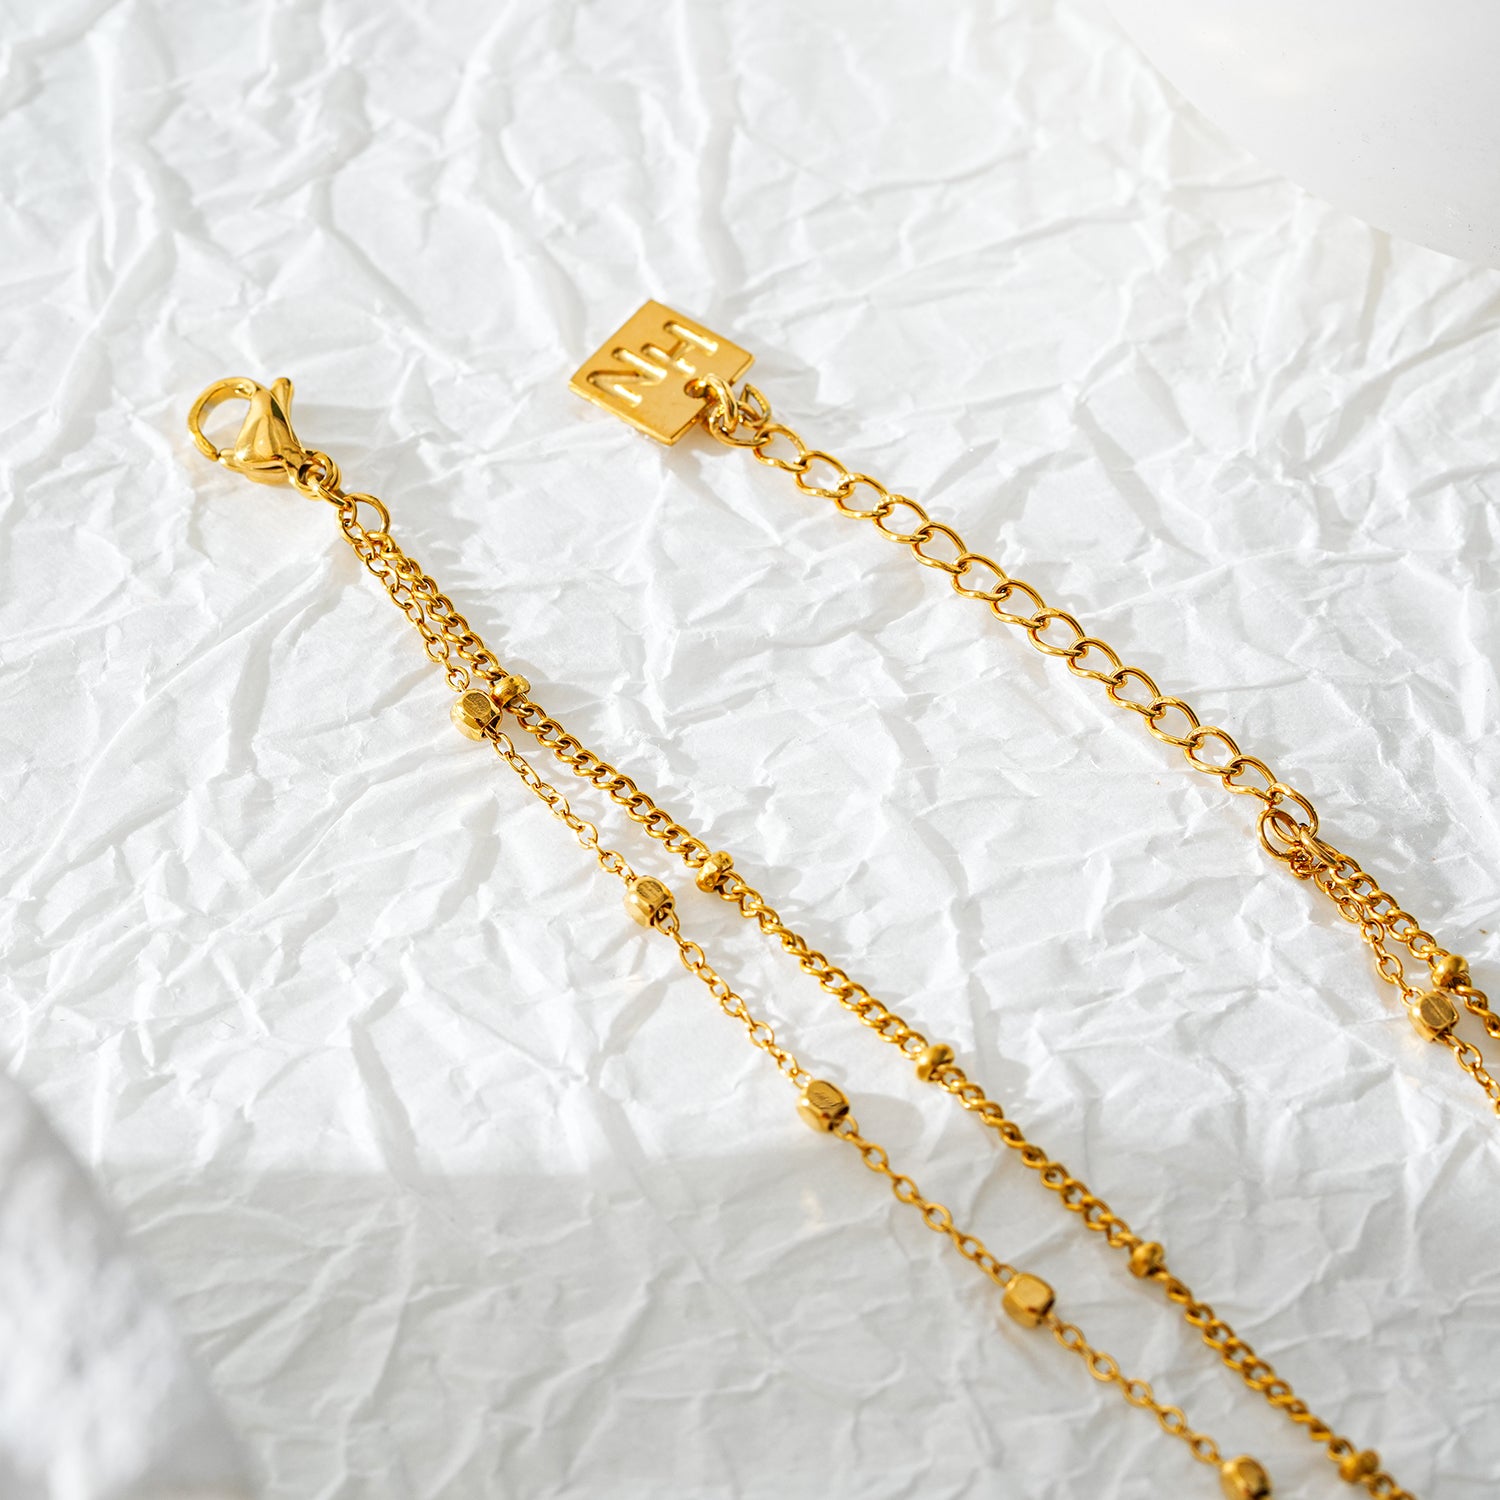 Style MARENTA LG 5435: Gilded Harmony Chain Anklet with Gold Beads and Freshwater Pearls.